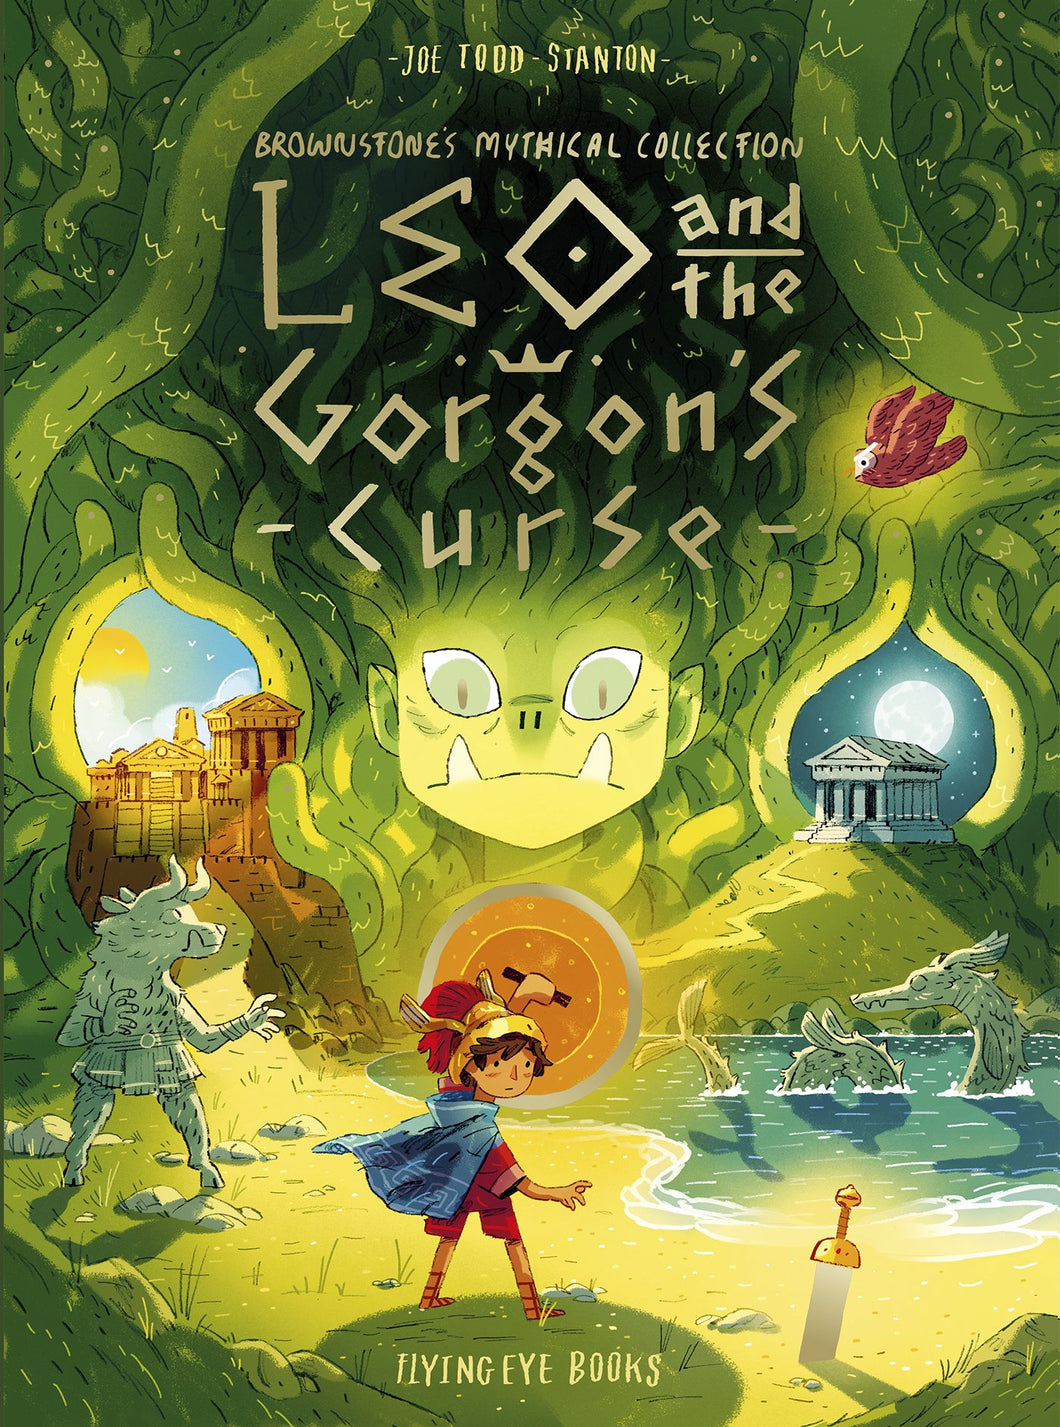 Leo and the Gorgon's Curse (Brownstone's Mythical Collection 4) by Joe Todd-Stanton